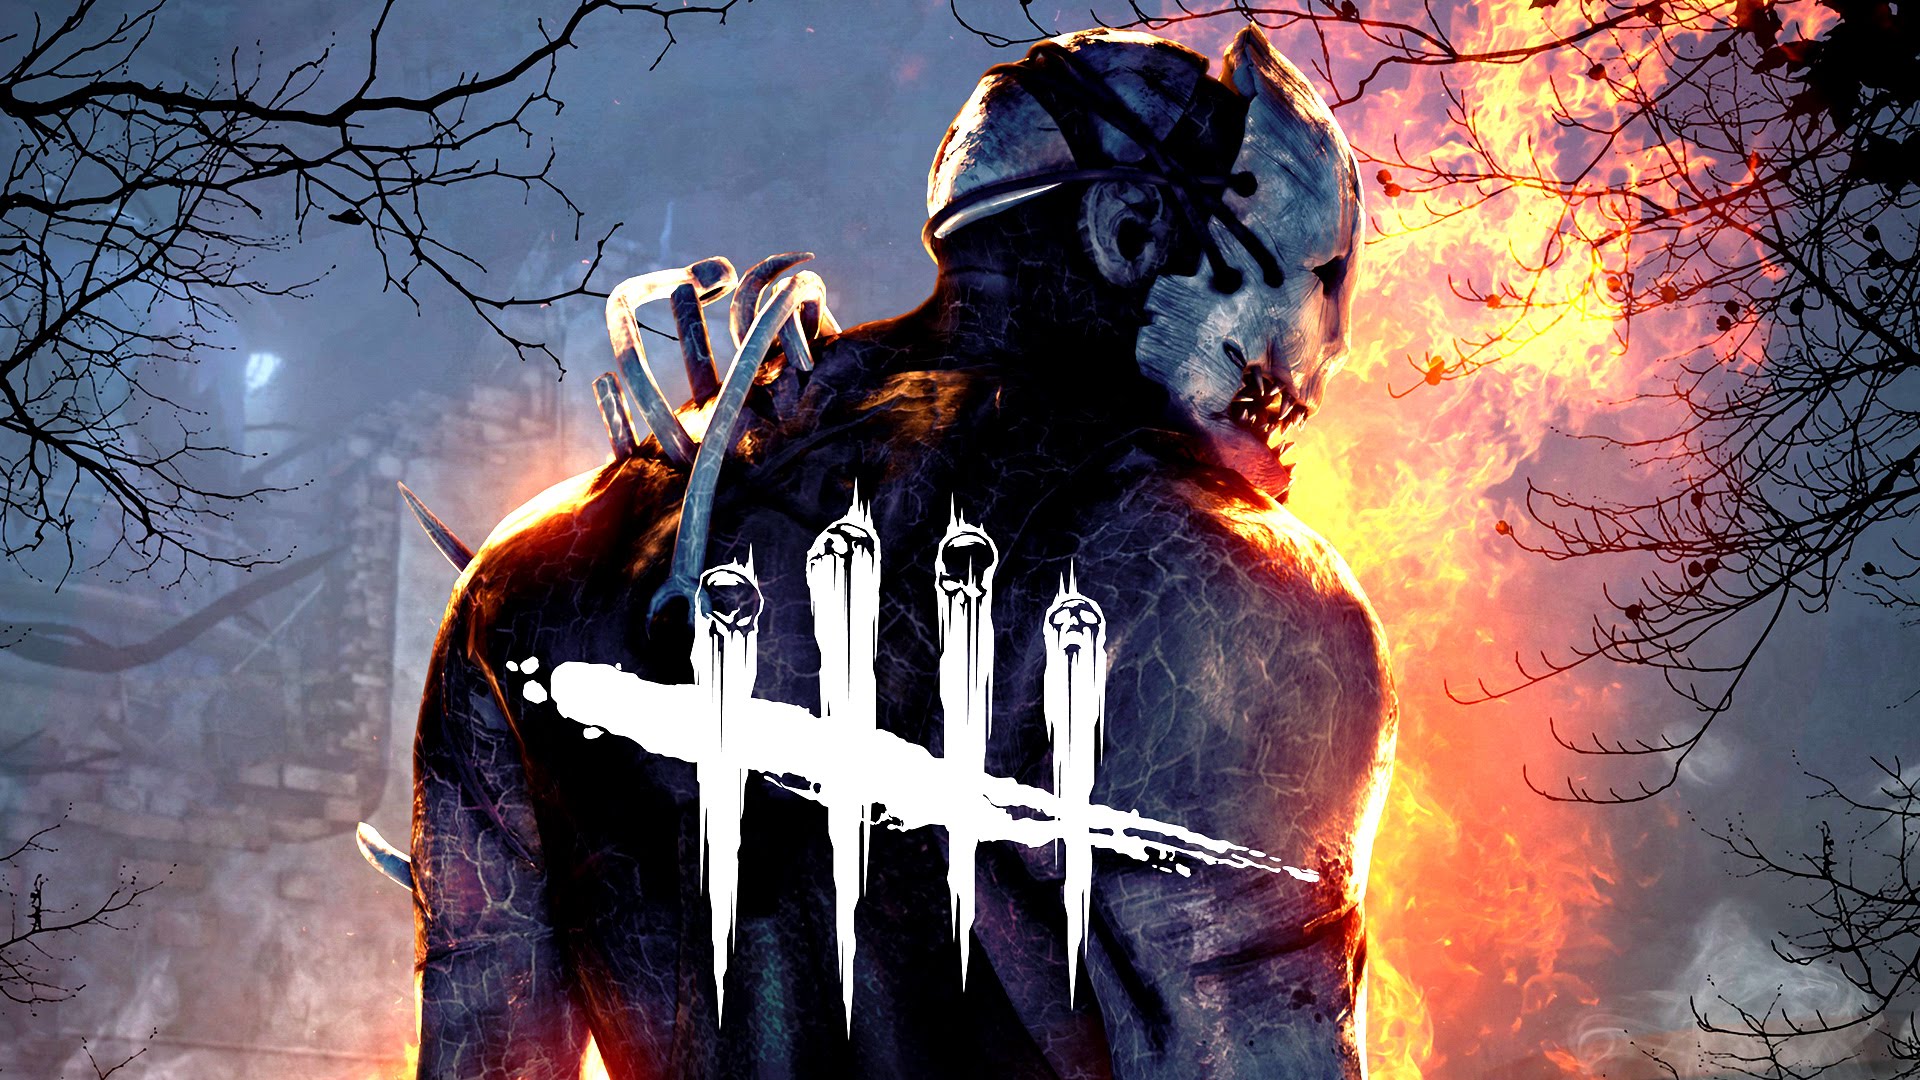 Dead By Daylight Is Free To Own On Epic Games Store For A Limited Time